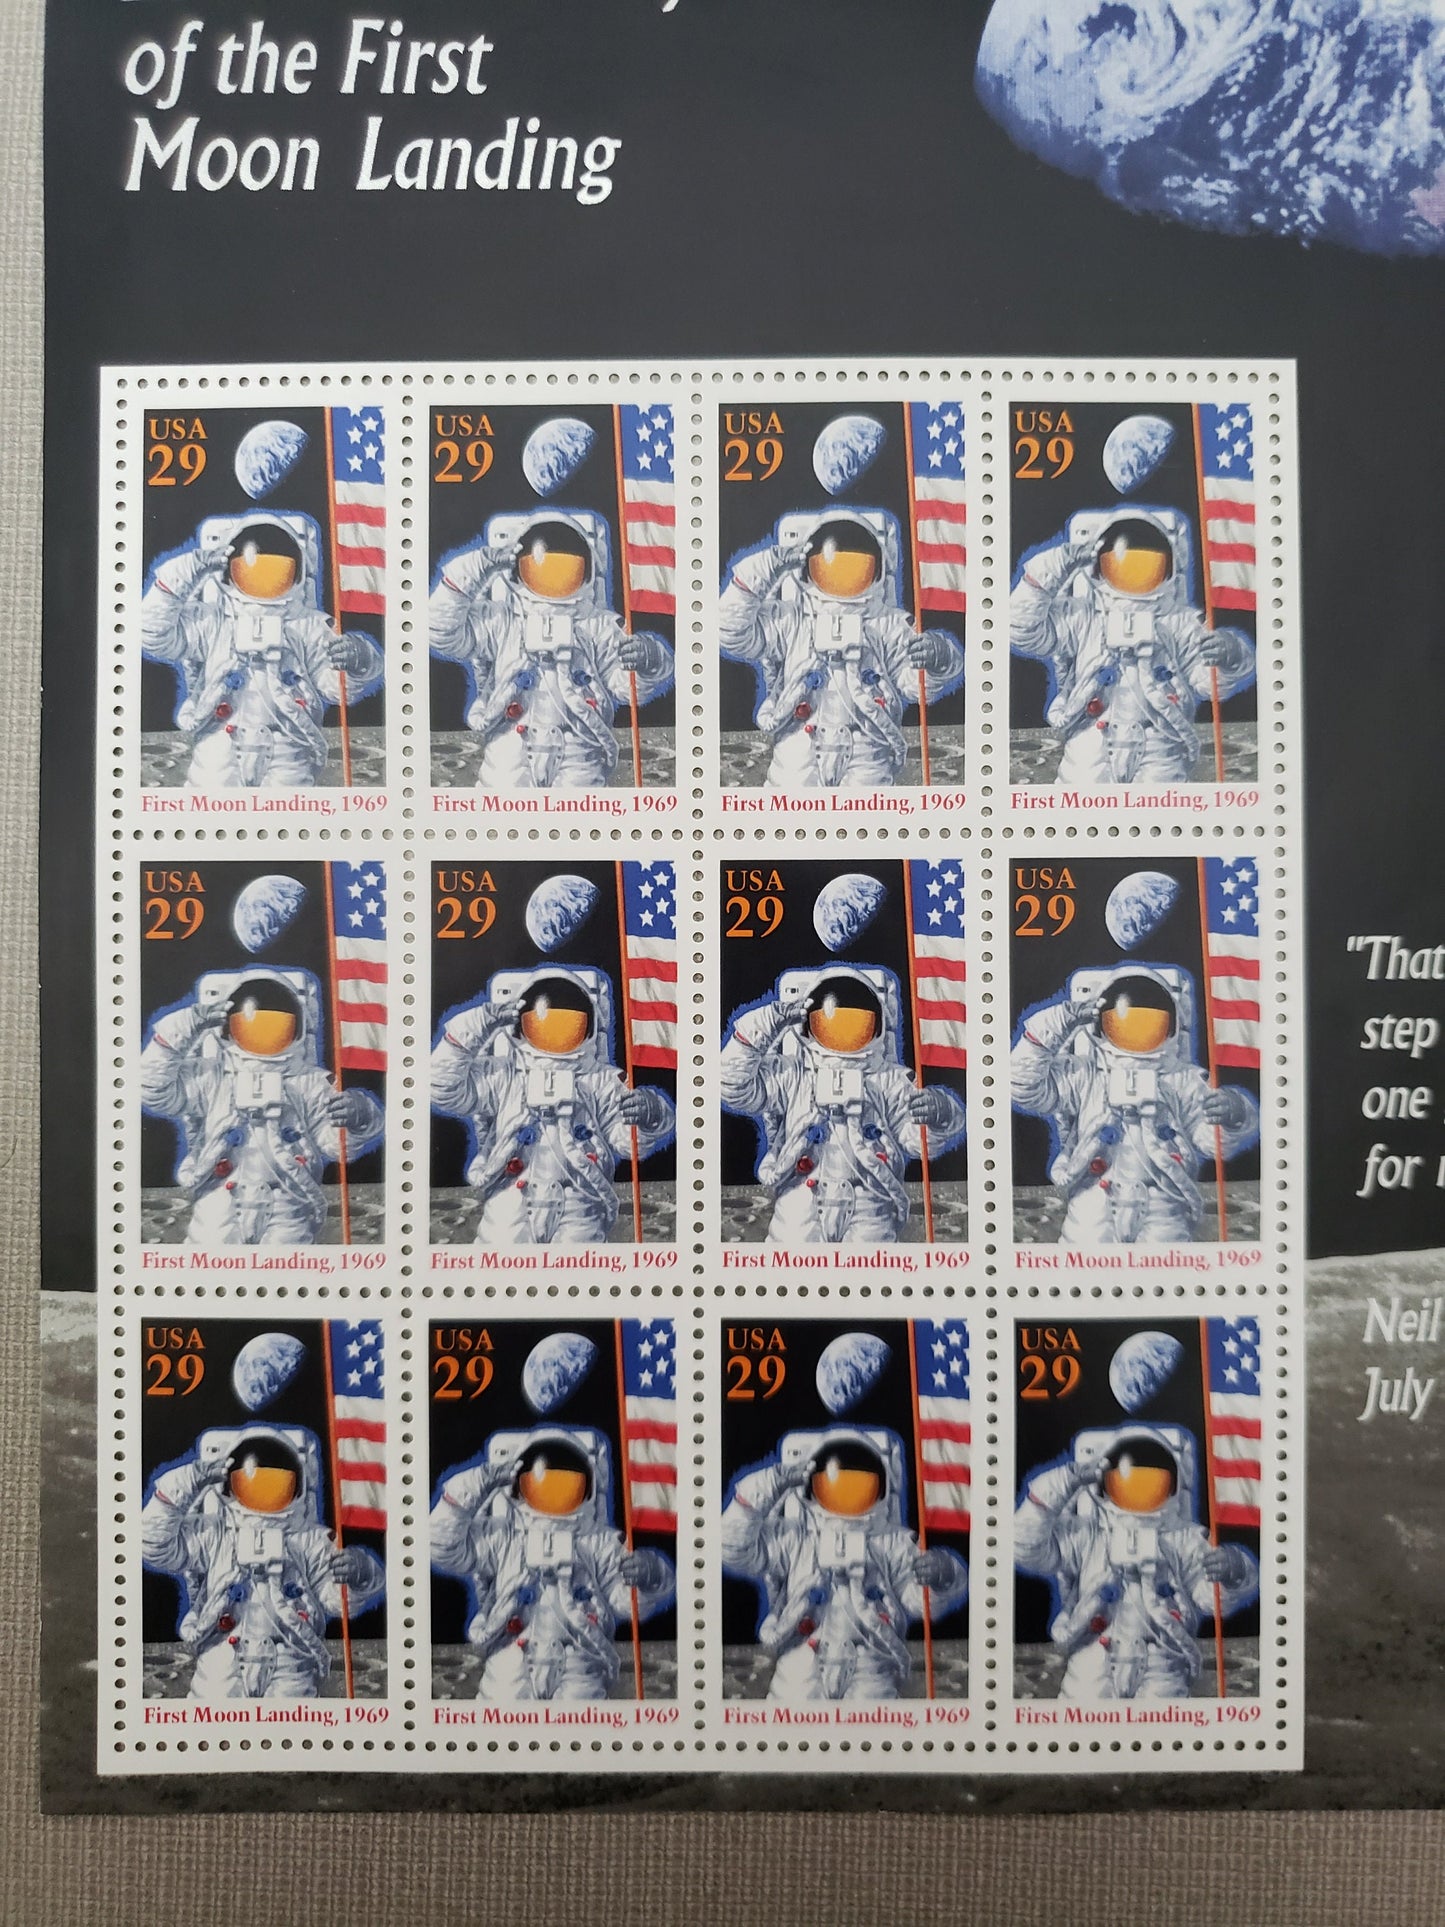 Celestial Commemoration: 25th Anniversary of First Moon Landing Stamps Signed by Apollo 16 Astronaut